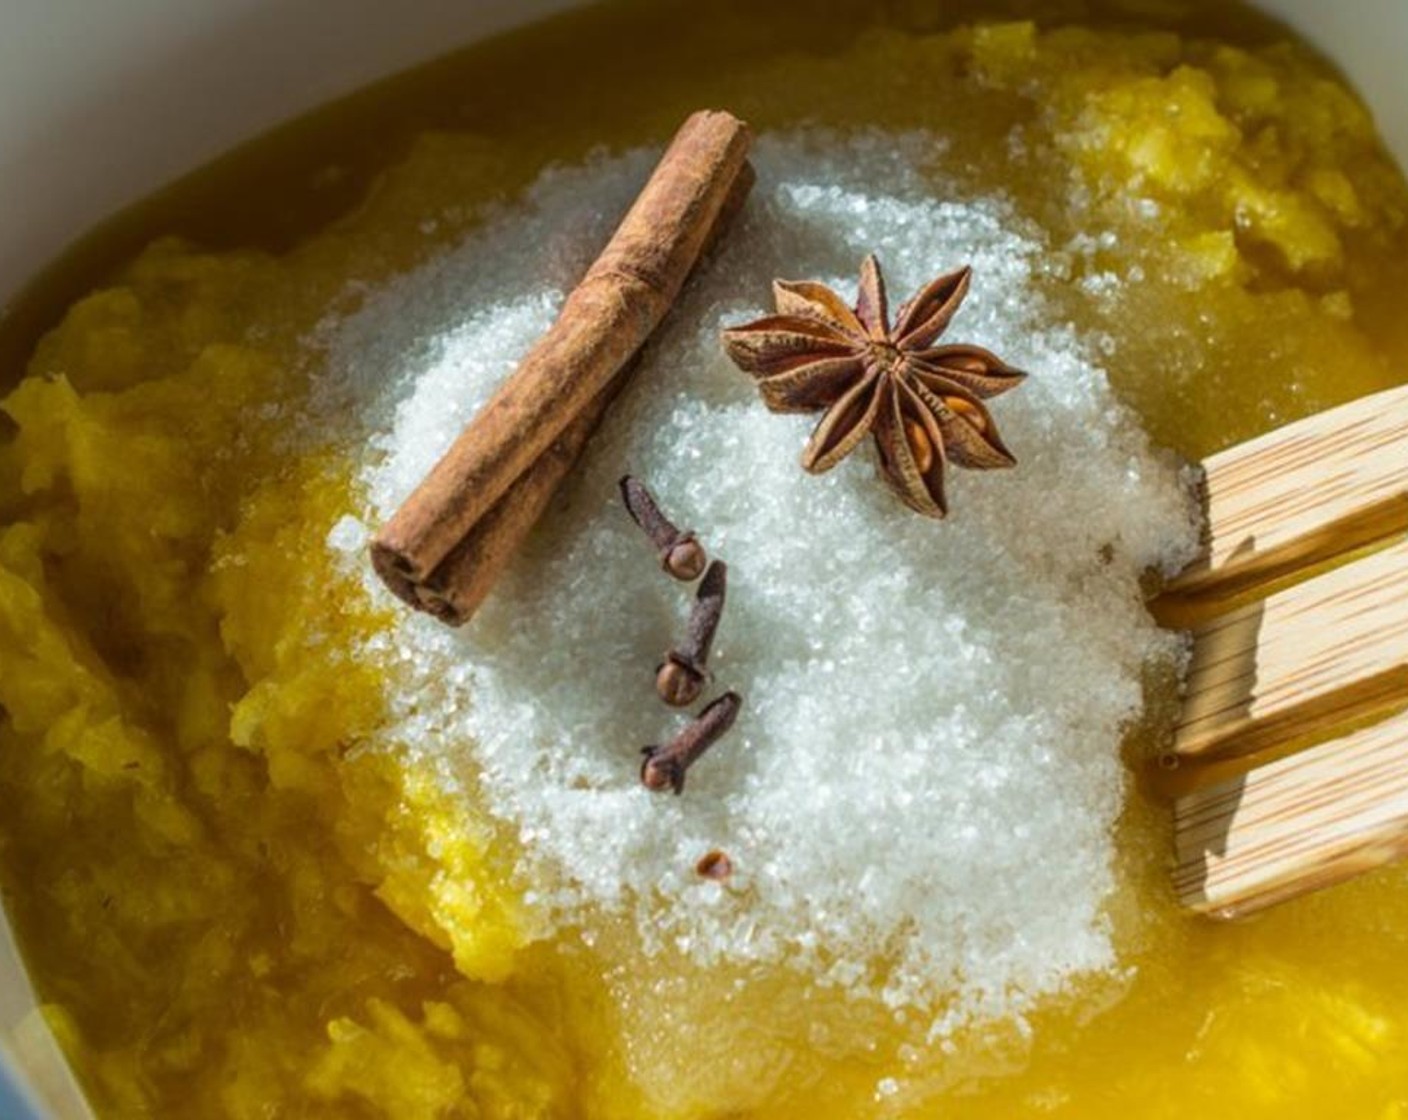 step 1 Combine Pineapples (4 cups), Granulated Sugar (2 1/2 cups), Cinnamon Stick (1), Star Anise (1), Whole Cloves (3) and juice from Lemon (1) in a large saucepan and simmer over medium-low heat for 30 minutes, stirring constantly.